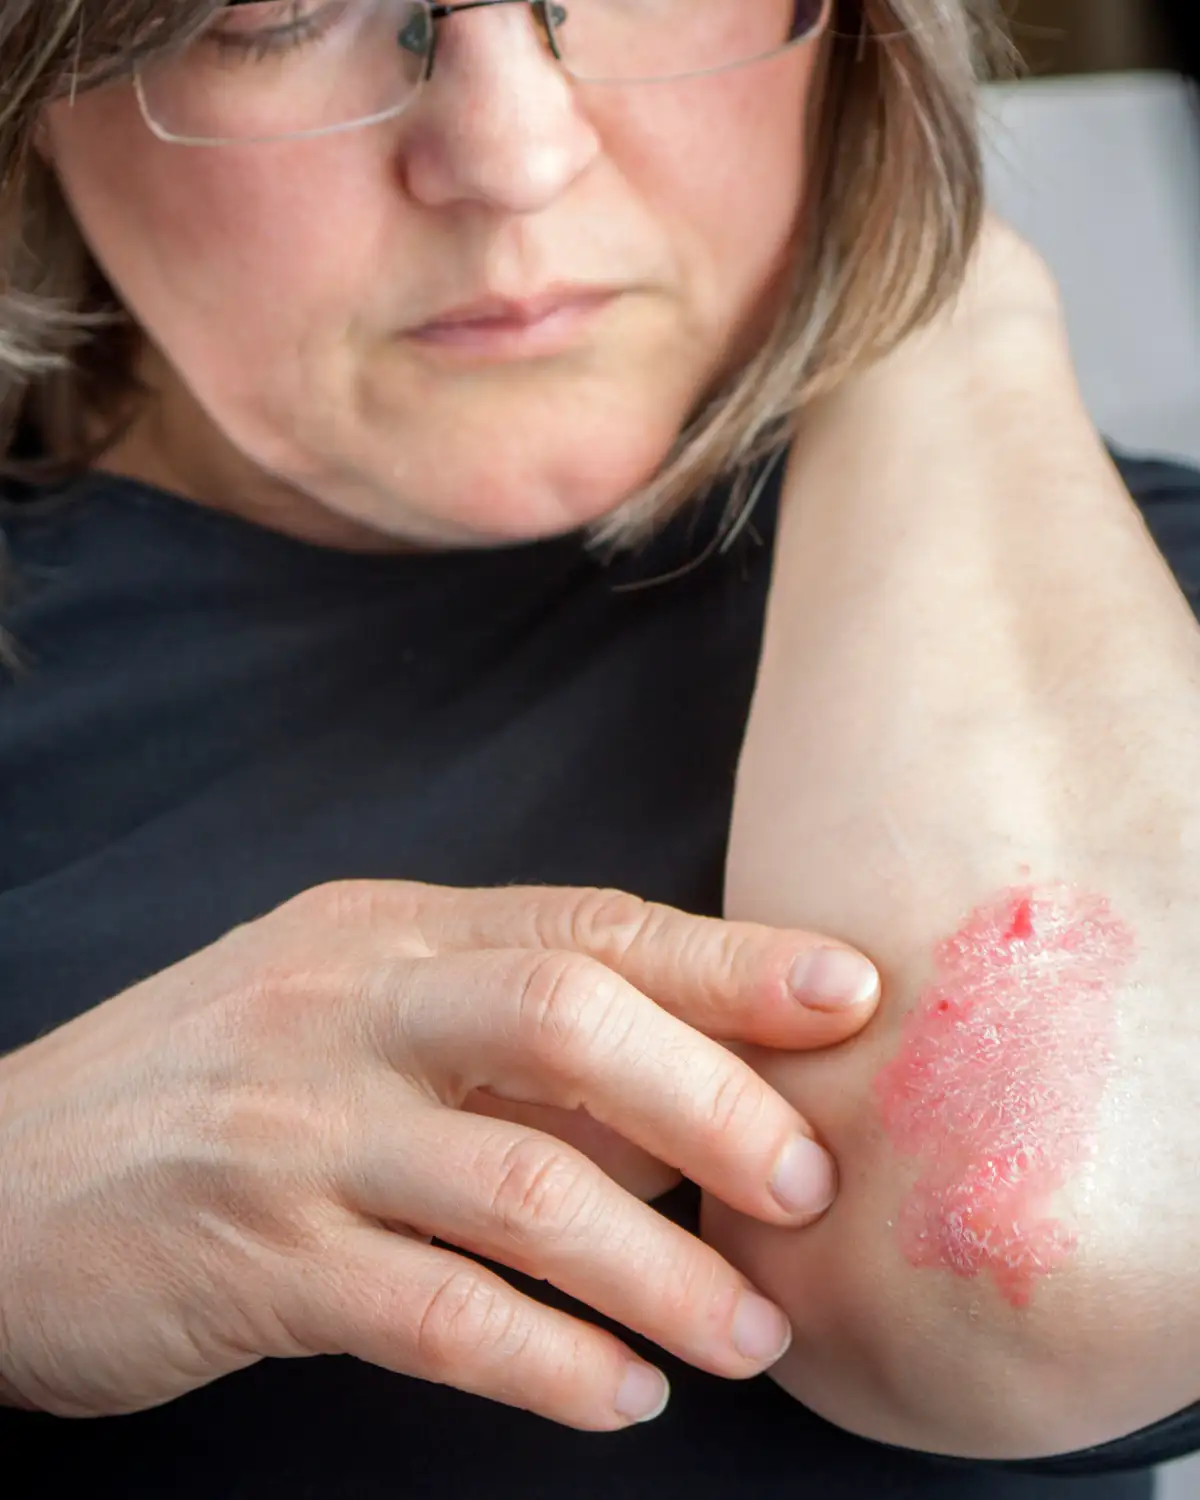 A woman with a patch of red on her arm.